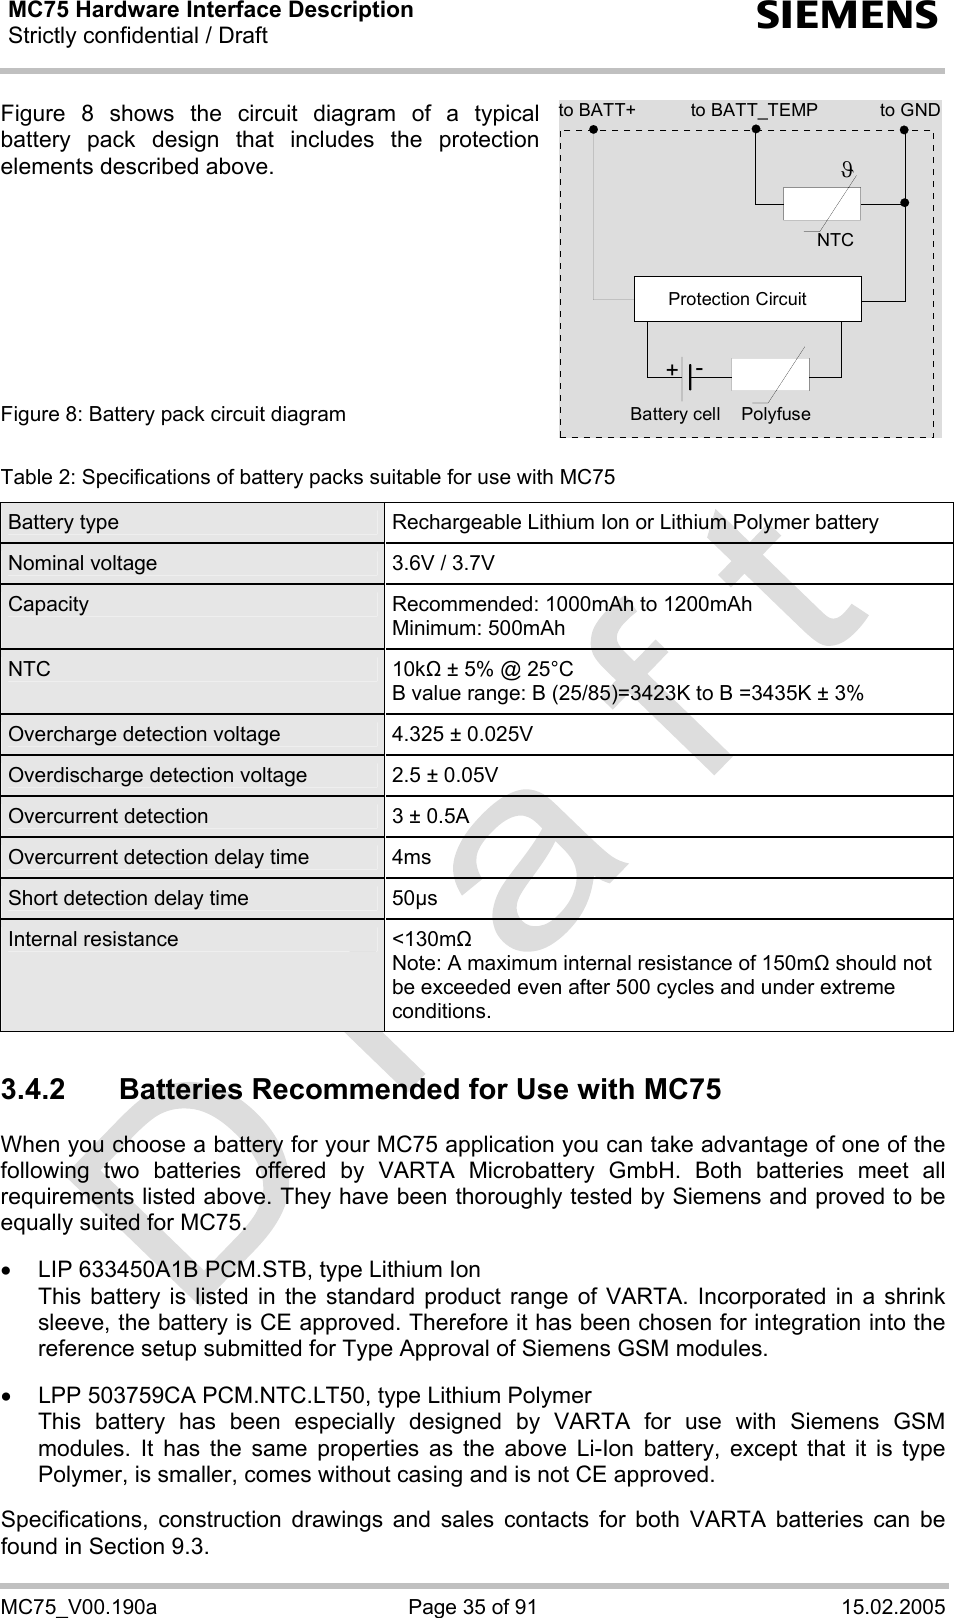 MC75 Hardware Interface Description Strictly confidential / Draft  s MC75_V00.190a  Page 35 of 91  15.02.2005 Figure 8 shows the circuit diagram of a typical battery pack design that includes the protection elements described above.          Figure 8: Battery pack circuit diagram  Table 2: Specifications of battery packs suitable for use with MC75 Battery type  Rechargeable Lithium Ion or Lithium Polymer battery Nominal voltage  3.6V / 3.7V Capacity  Recommended: 1000mAh to 1200mAh Minimum: 500mAh NTC  10k ± 5% @ 25°C B value range: B (25/85)=3423K to B =3435K ± 3% Overcharge detection voltage  4.325 ± 0.025V Overdischarge detection voltage  2.5 ± 0.05V Overcurrent detection  3 ± 0.5A Overcurrent detection delay time  4ms Short detection delay time  50µs Internal resistance  &lt;130m Note: A maximum internal resistance of 150m should not be exceeded even after 500 cycles and under extreme conditions.  3.4.2  Batteries Recommended for Use with MC75 When you choose a battery for your MC75 application you can take advantage of one of the following two batteries offered by VARTA Microbattery GmbH. Both batteries meet all requirements listed above. They have been thoroughly tested by Siemens and proved to be equally suited for MC75.  •  LIP 633450A1B PCM.STB, type Lithium Ion This battery is listed in the standard product range of VARTA. Incorporated in a shrink sleeve, the battery is CE approved. Therefore it has been chosen for integration into the reference setup submitted for Type Approval of Siemens GSM modules.  •  LPP 503759CA PCM.NTC.LT50, type Lithium Polymer This battery has been especially designed by VARTA for use with Siemens GSM modules. It has the same properties as the above Li-Ion battery, except that it is type Polymer, is smaller, comes without casing and is not CE approved.  Specifications, construction drawings and sales contacts for both VARTA batteries can be found in Section 9.3.  to BATT_TEMP to GNDNTCPolyfuseϑProtection Circuit+-Battery cellto BATT+